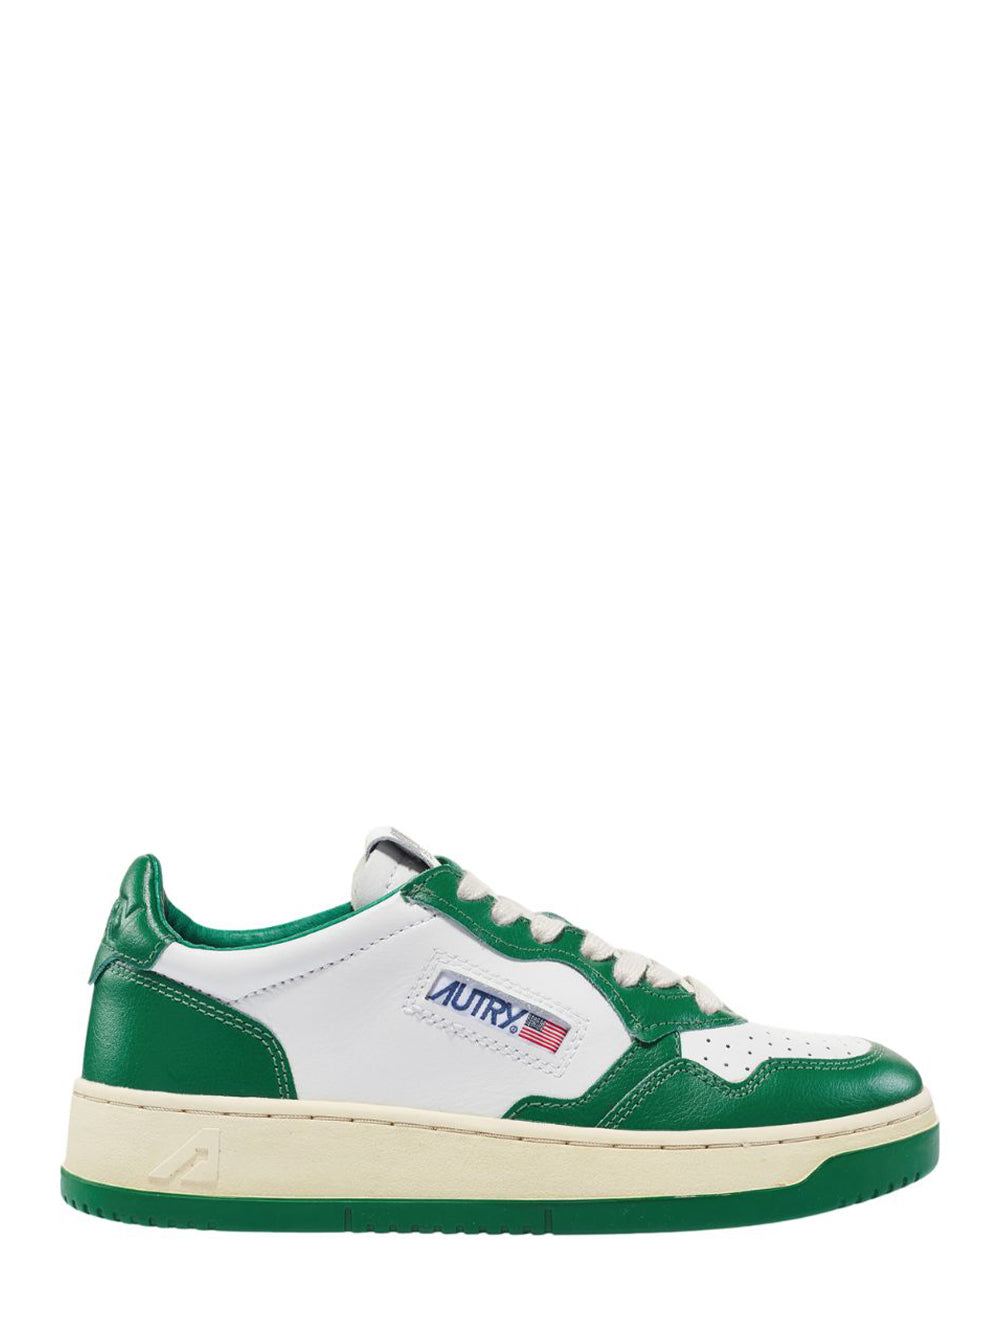 Medalist Low Sneakers In Two-Tone Leather (White And Green) (Women)